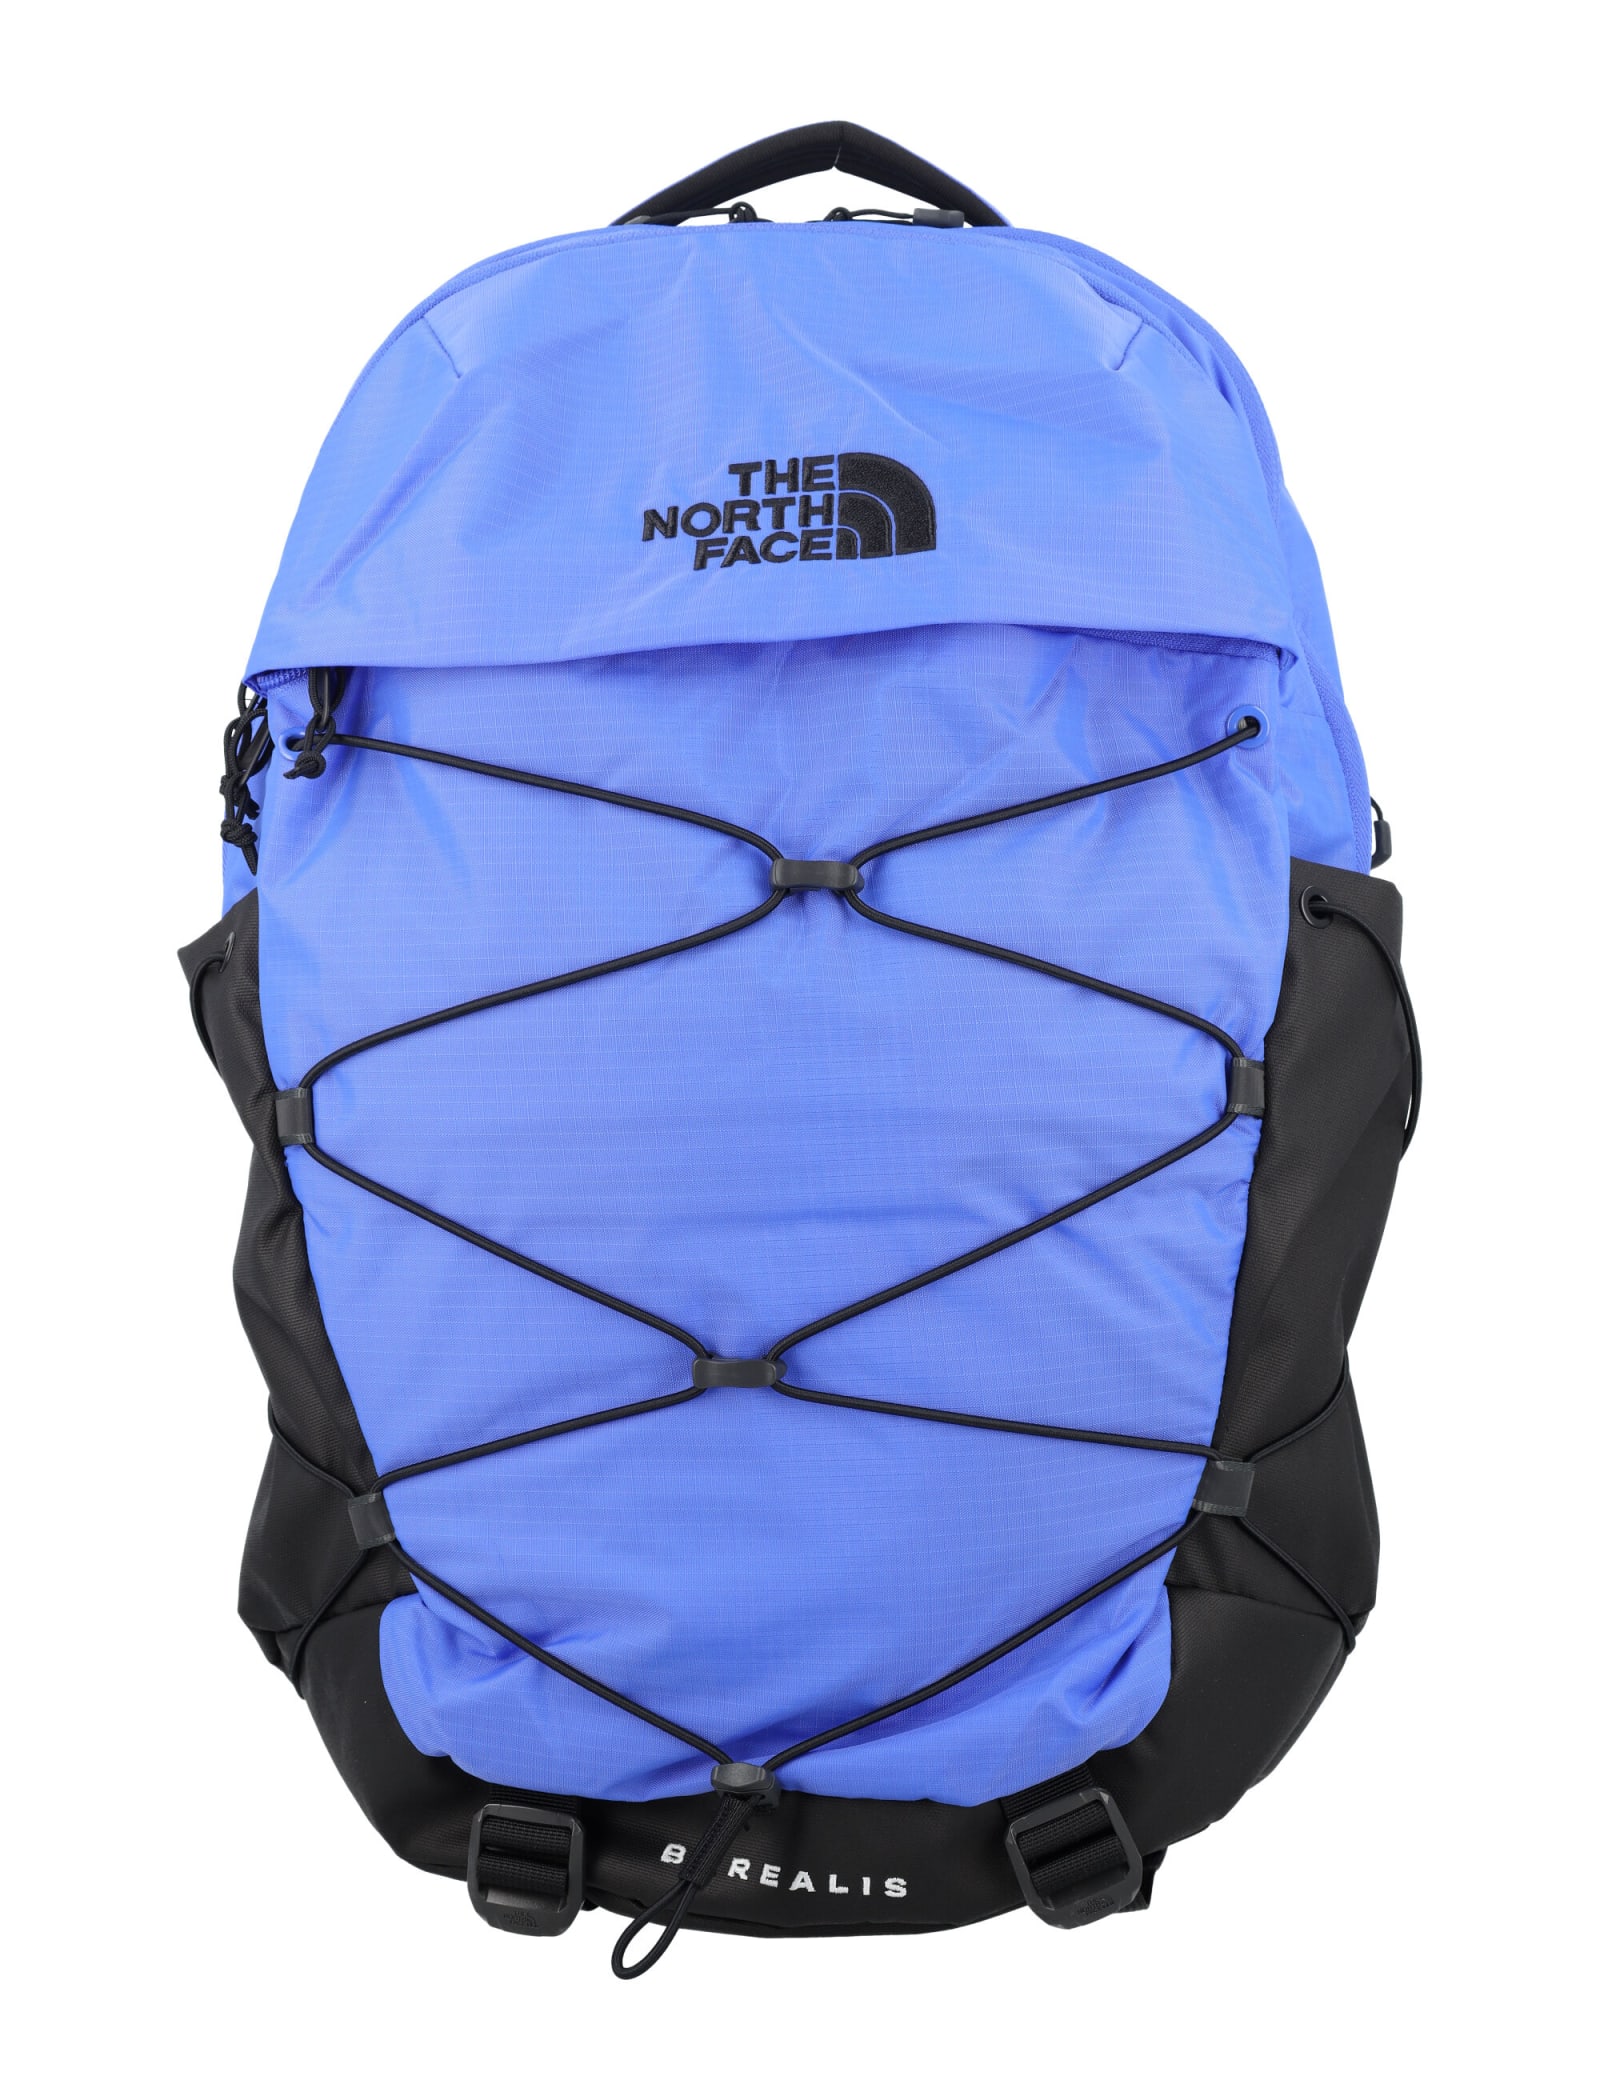 The North Face Borealis Backpack In Blue Royal